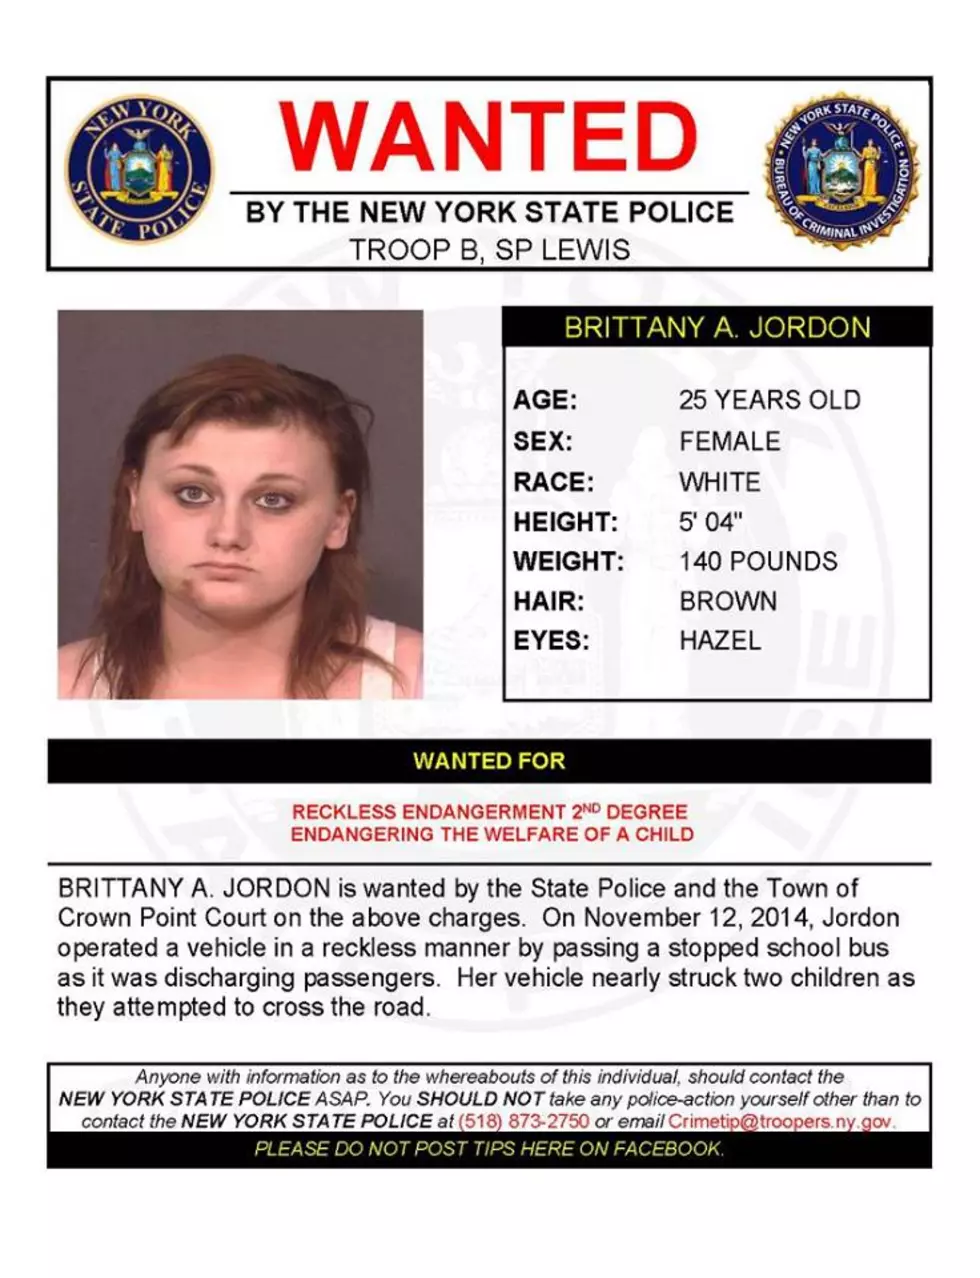 Warrant Wednesday: Woman Wanted for Endangering the Welfare of a Child